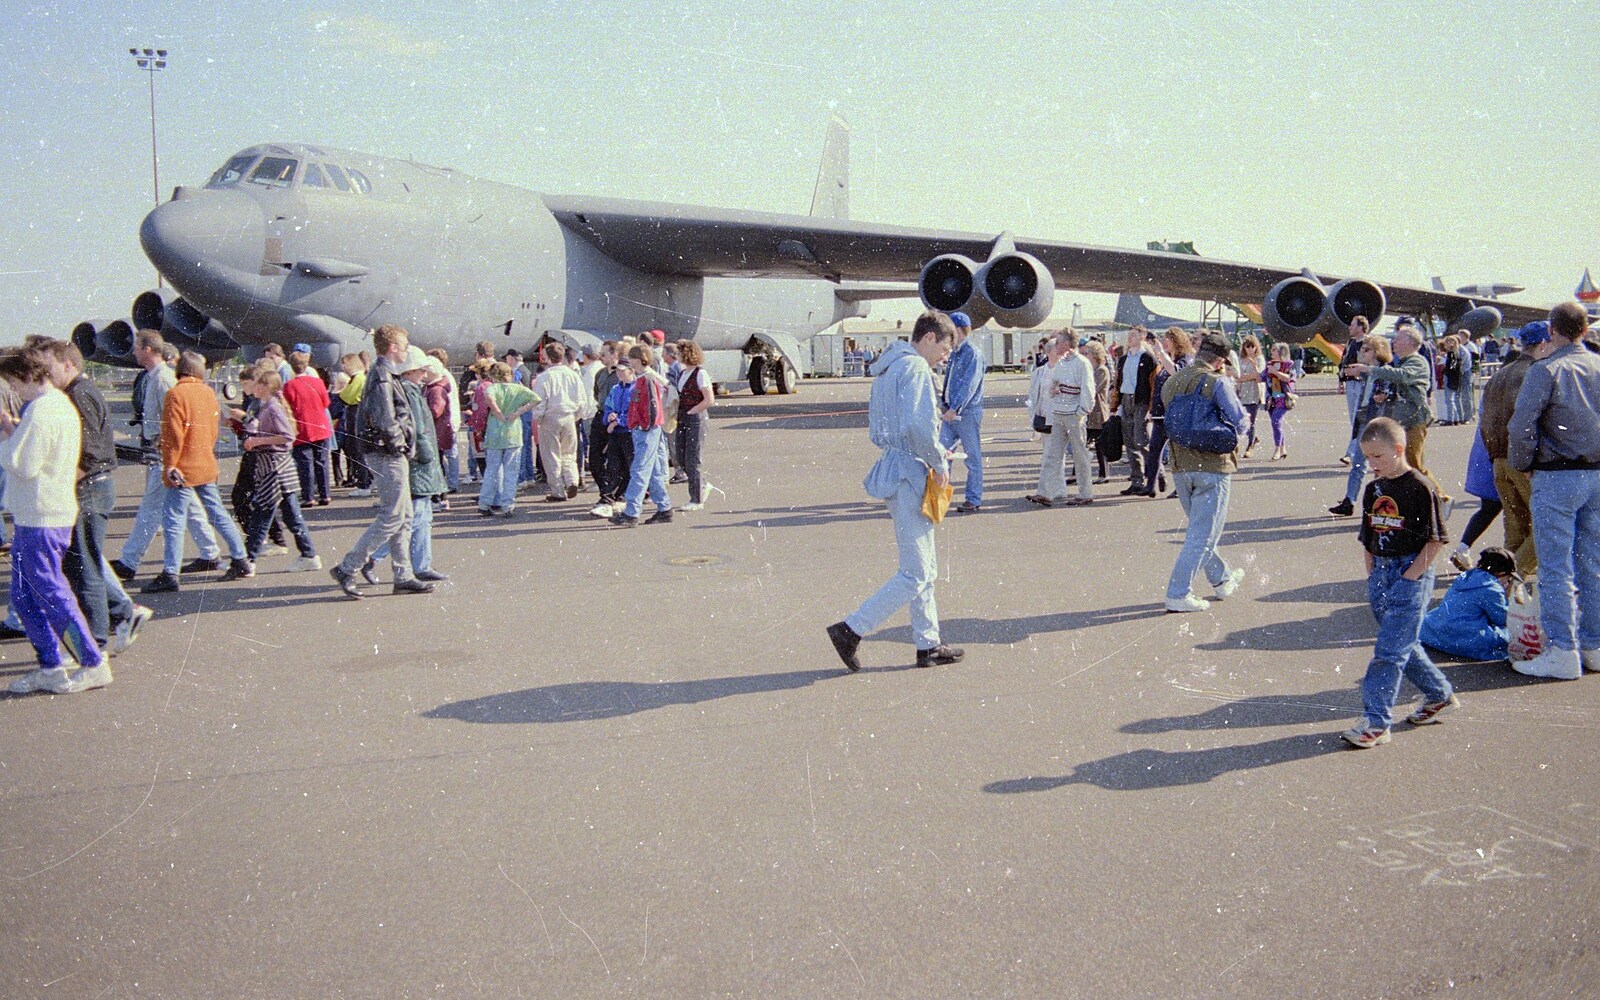 Crowds mill around in front of the B-52 from The Mildenhall Air Fete, Mildenhall, Suffolk - 29th May 1994